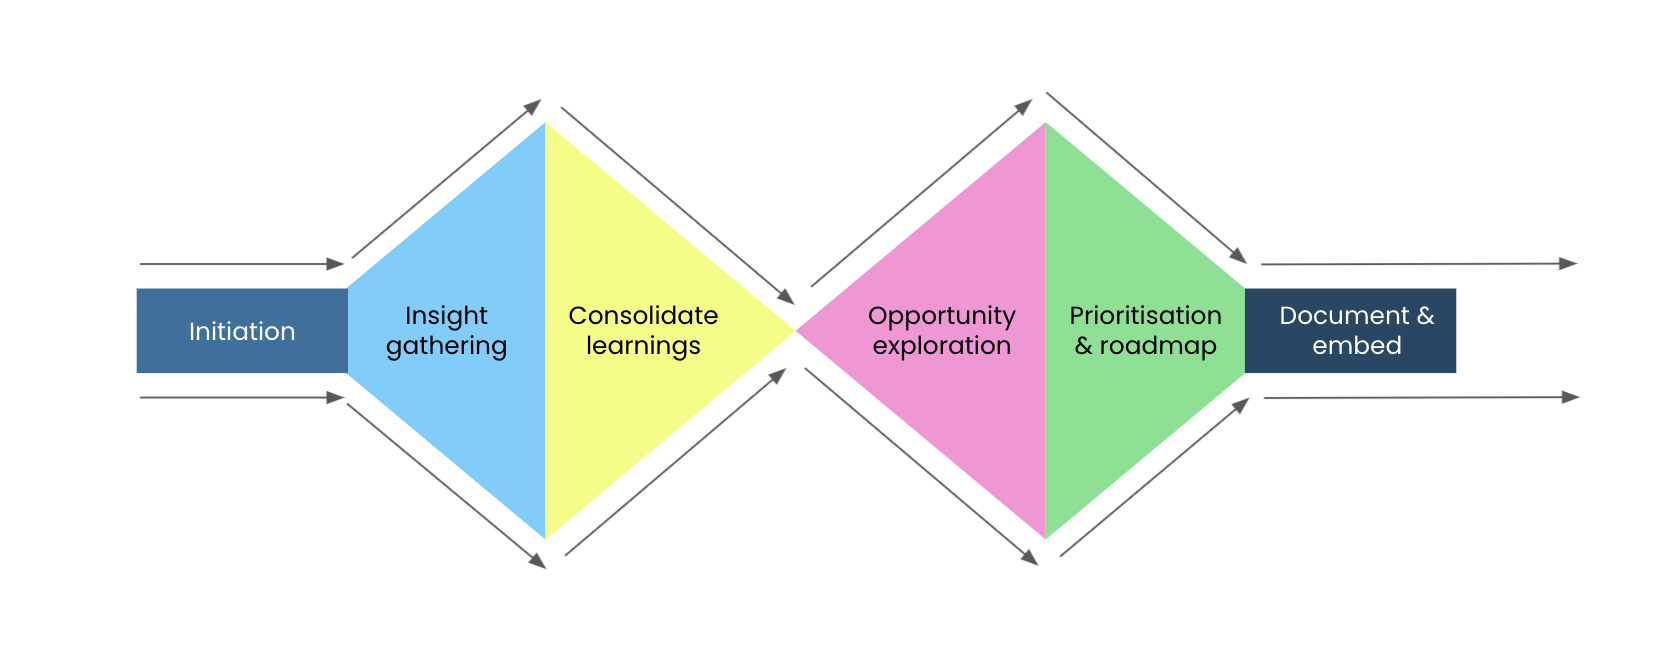 diagram breaking down the digital strategy process. Starting with initiation to insight gathering to consolidating learning. Then entering the second phase starting with opportunity exploration and prioritisation and roadmap and then ending with document and embed.